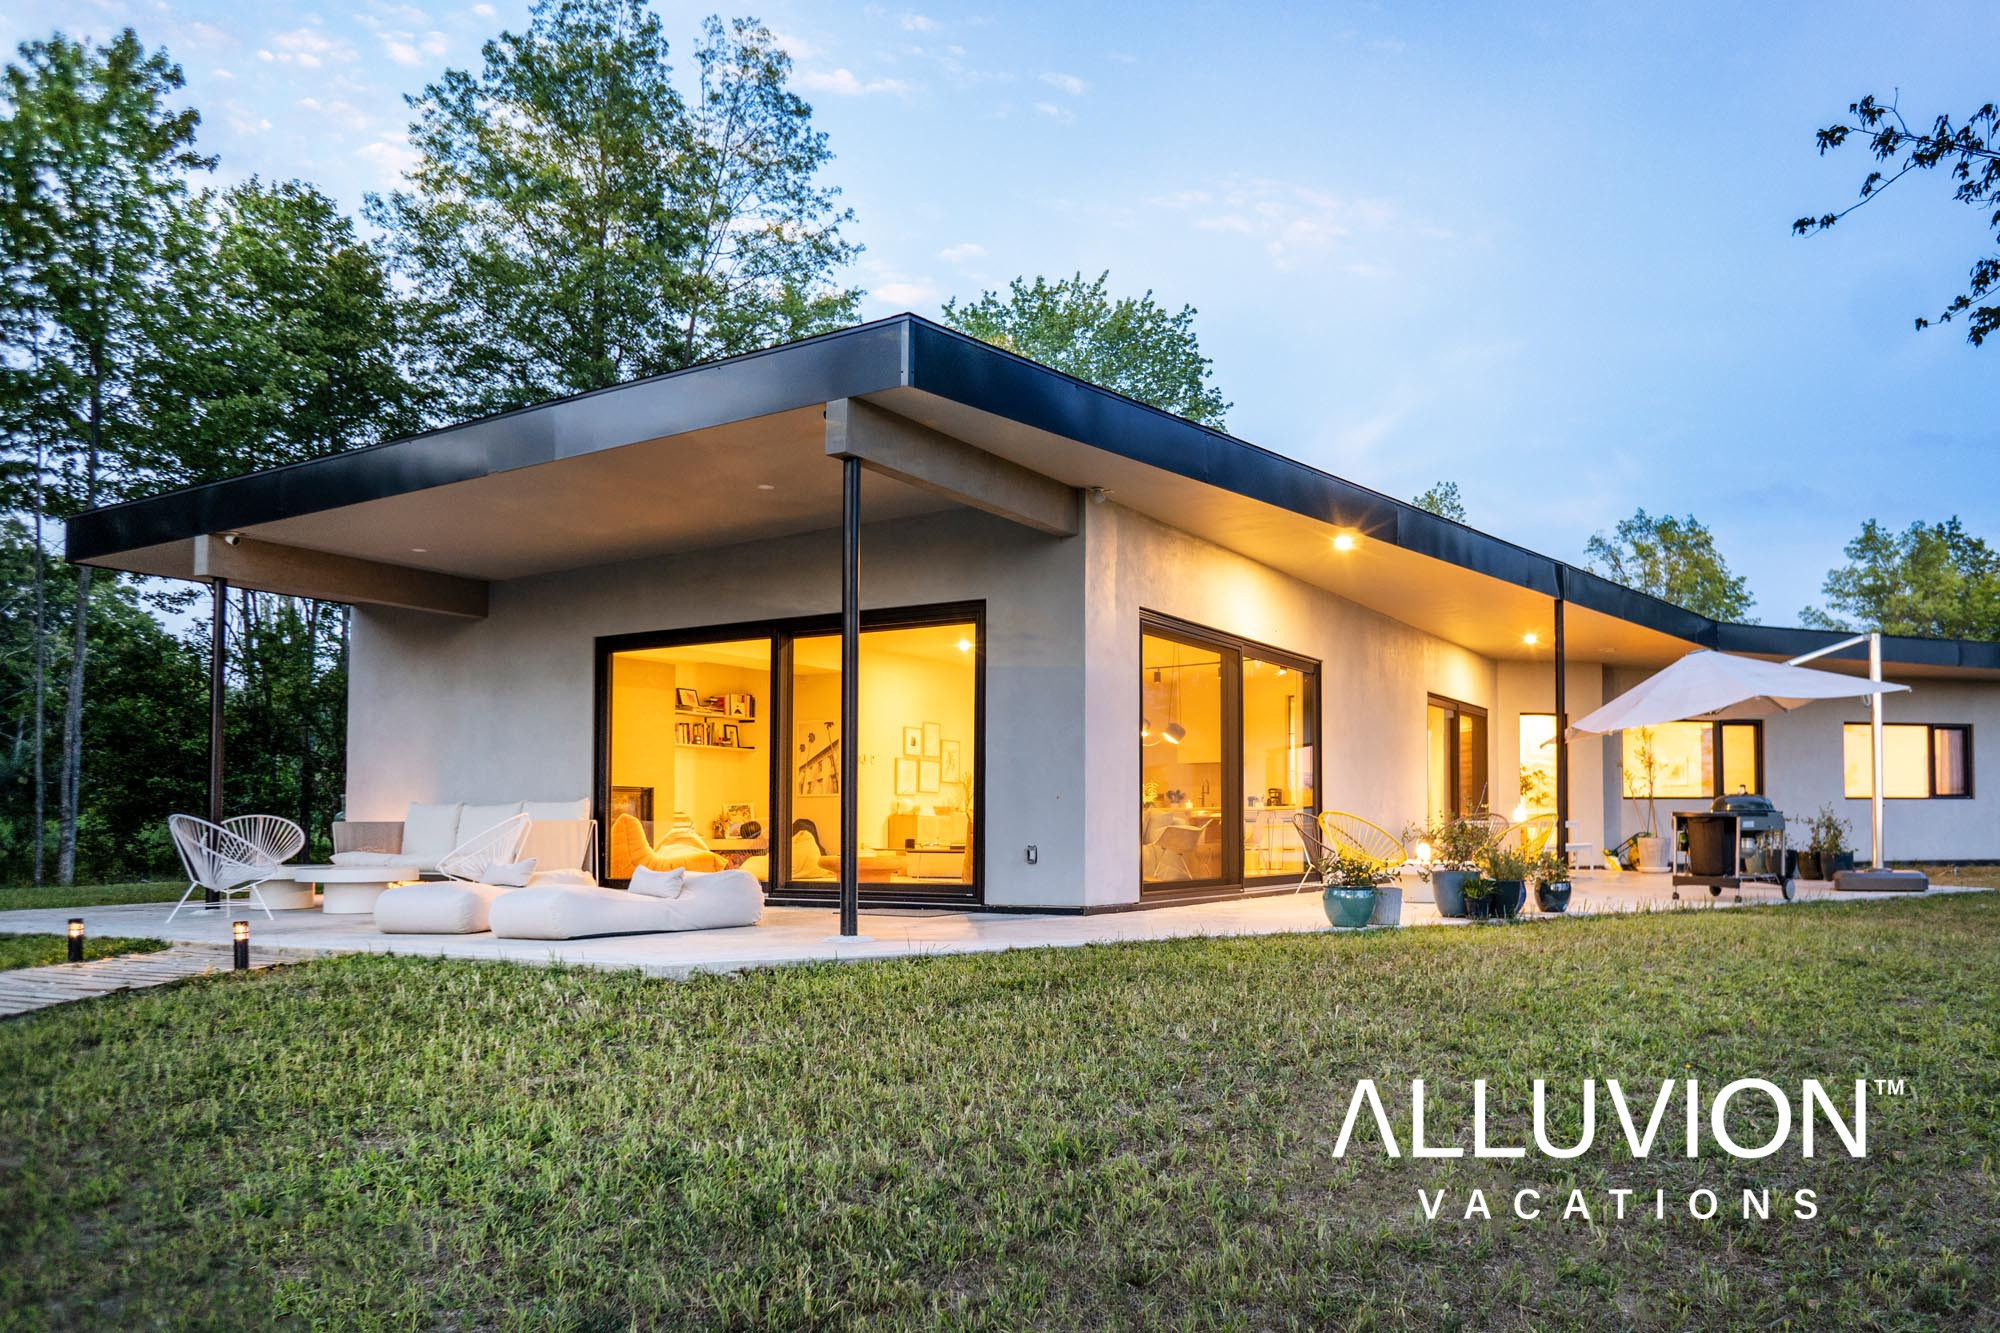 Luxurious Modern Villa with a Pool in the Heart of Hudson Valley's Farmland – Airbnb Management by Alluvion Vacations – Upstate Airbnb Management – Catskills Vacation Rental Management